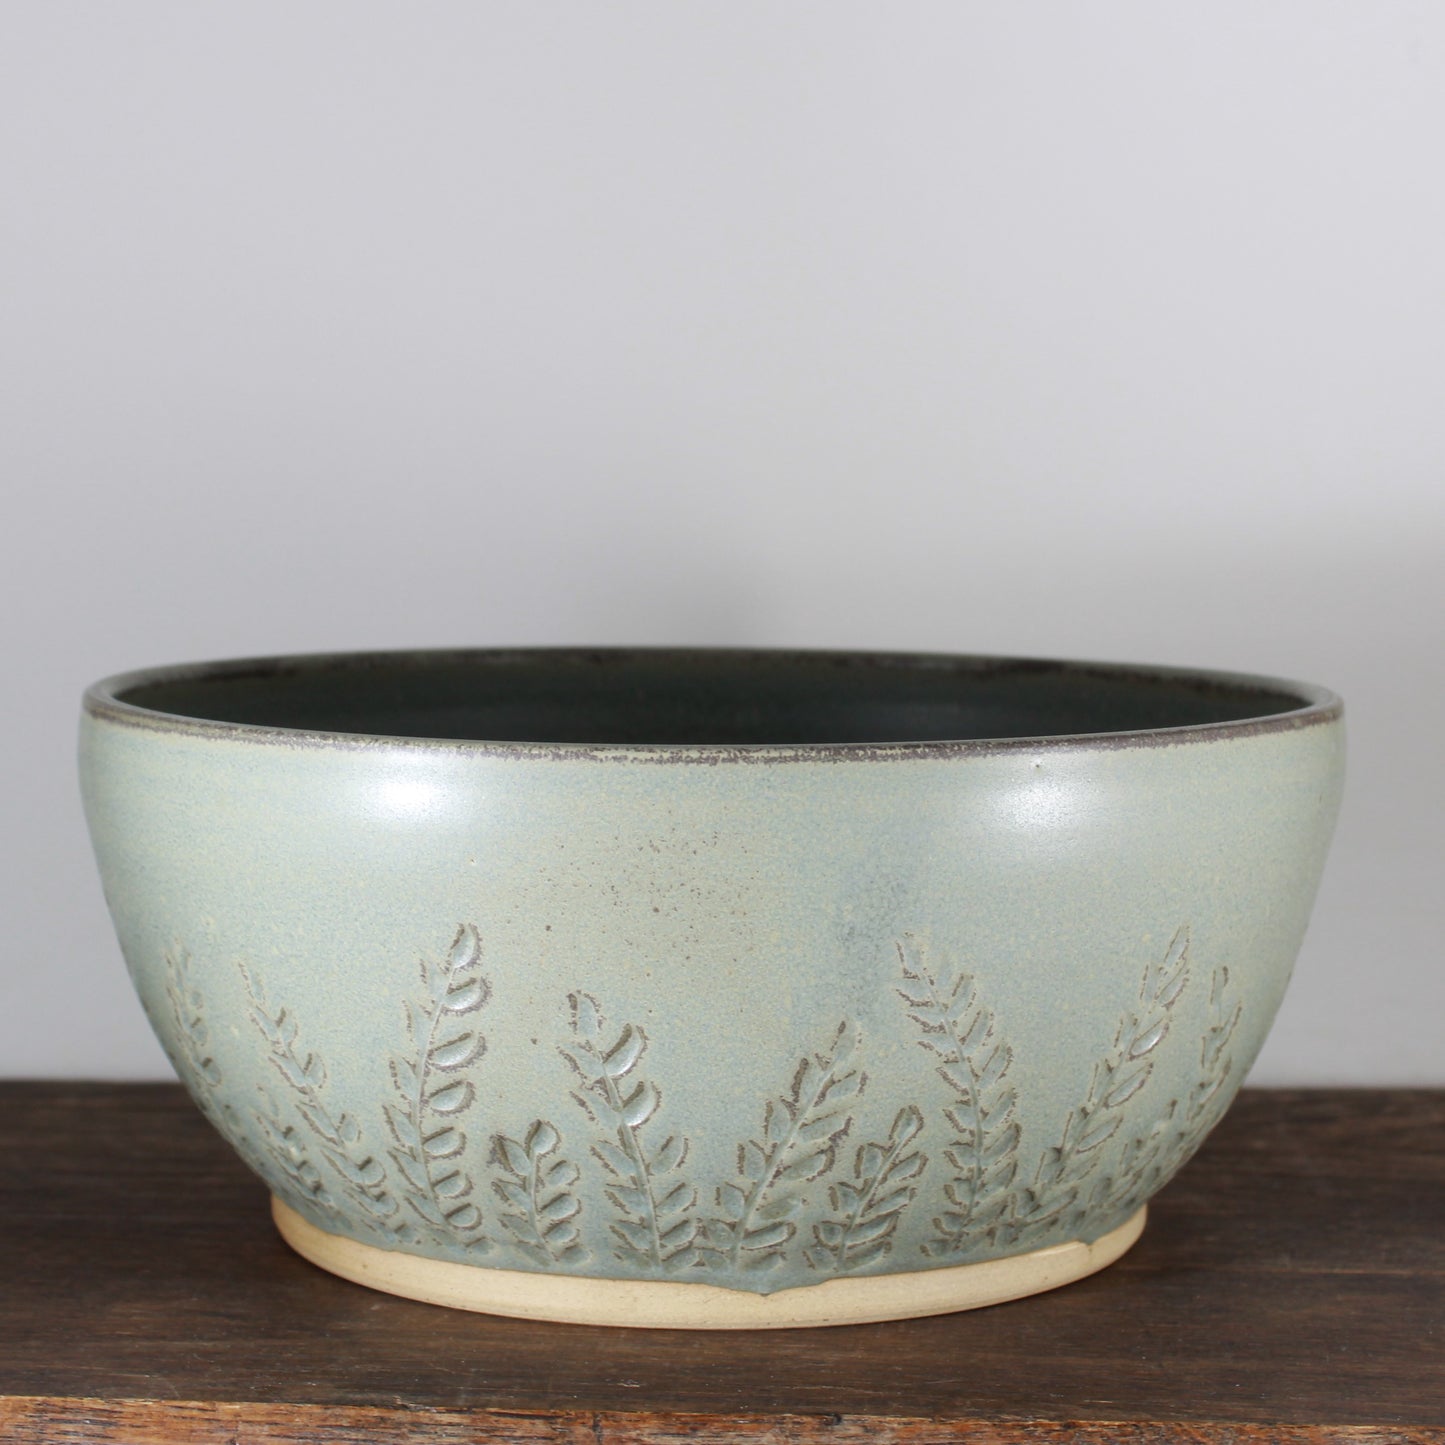 Handmade etched bowl